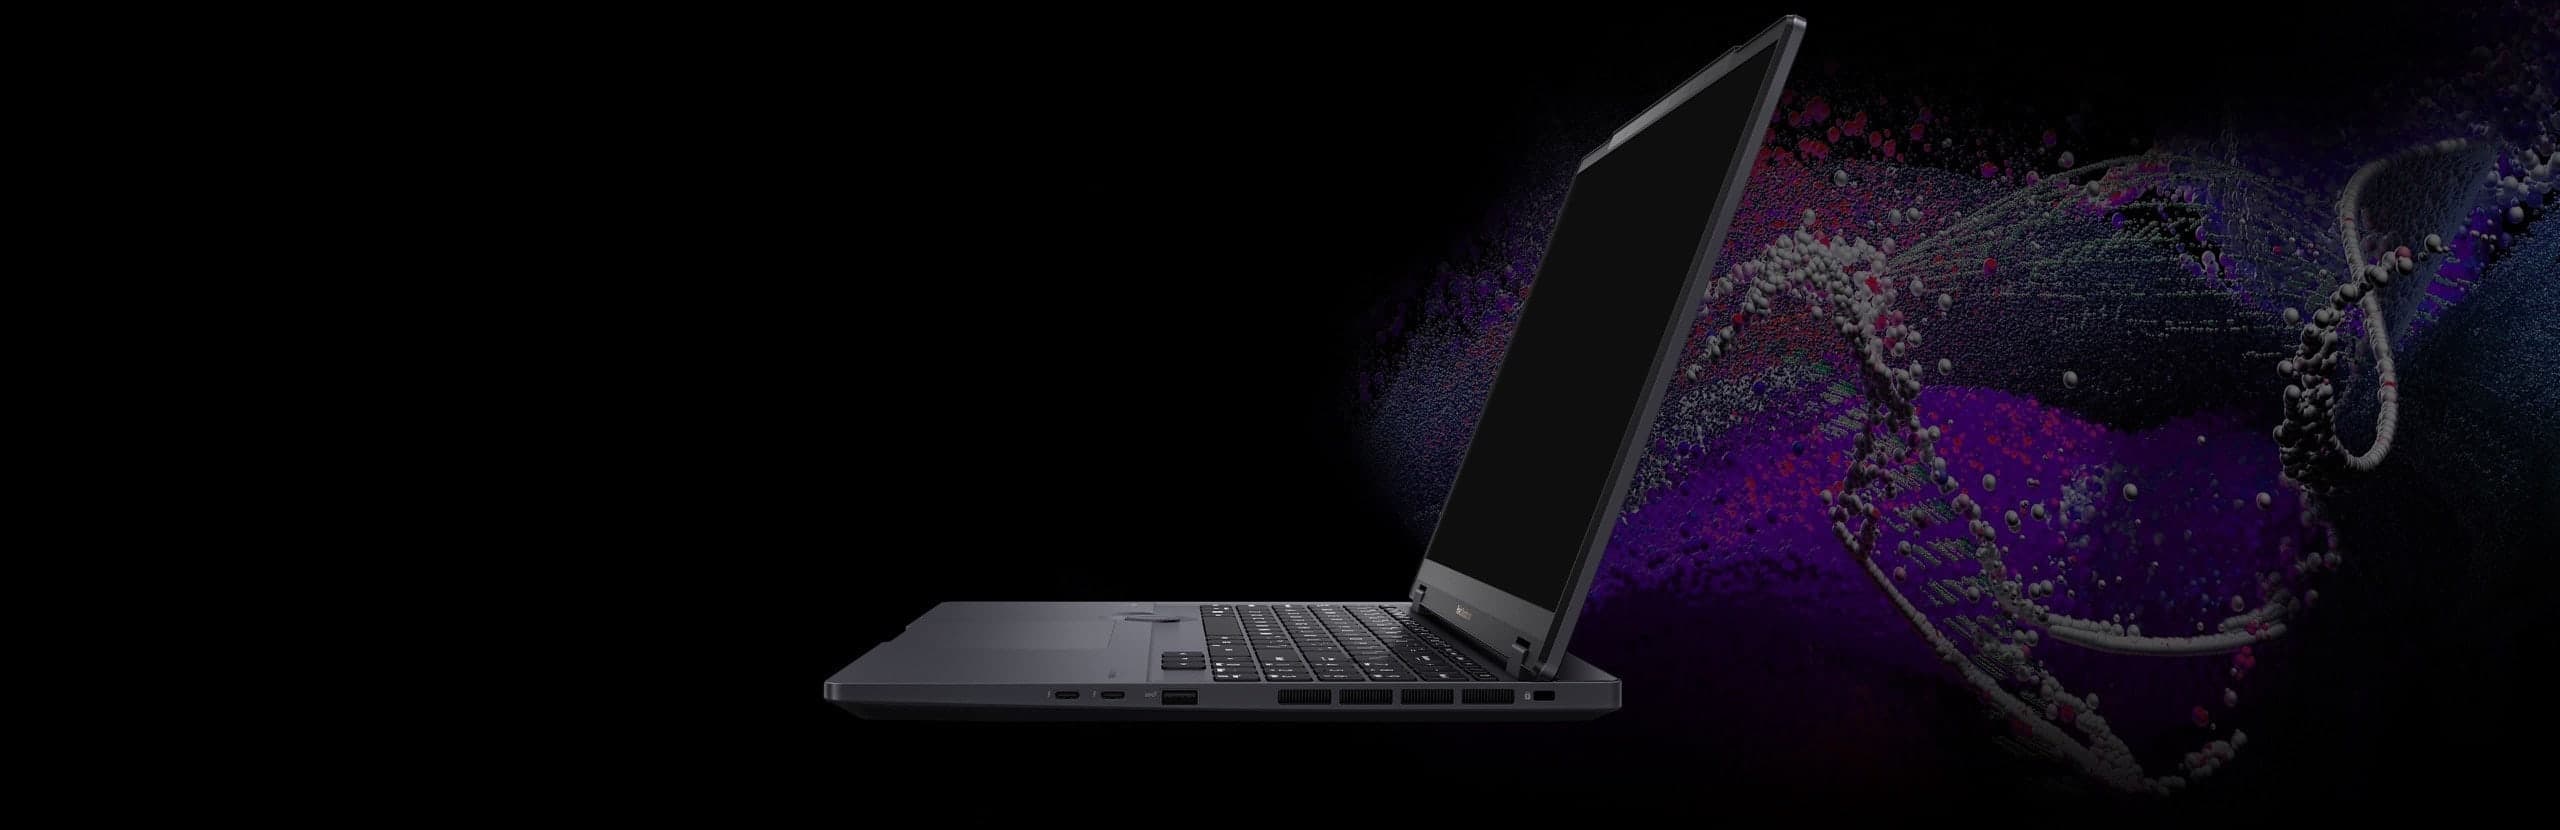 Asus debuts cutting-edge laptop collection, including world's first glasses-free 3D OLED models